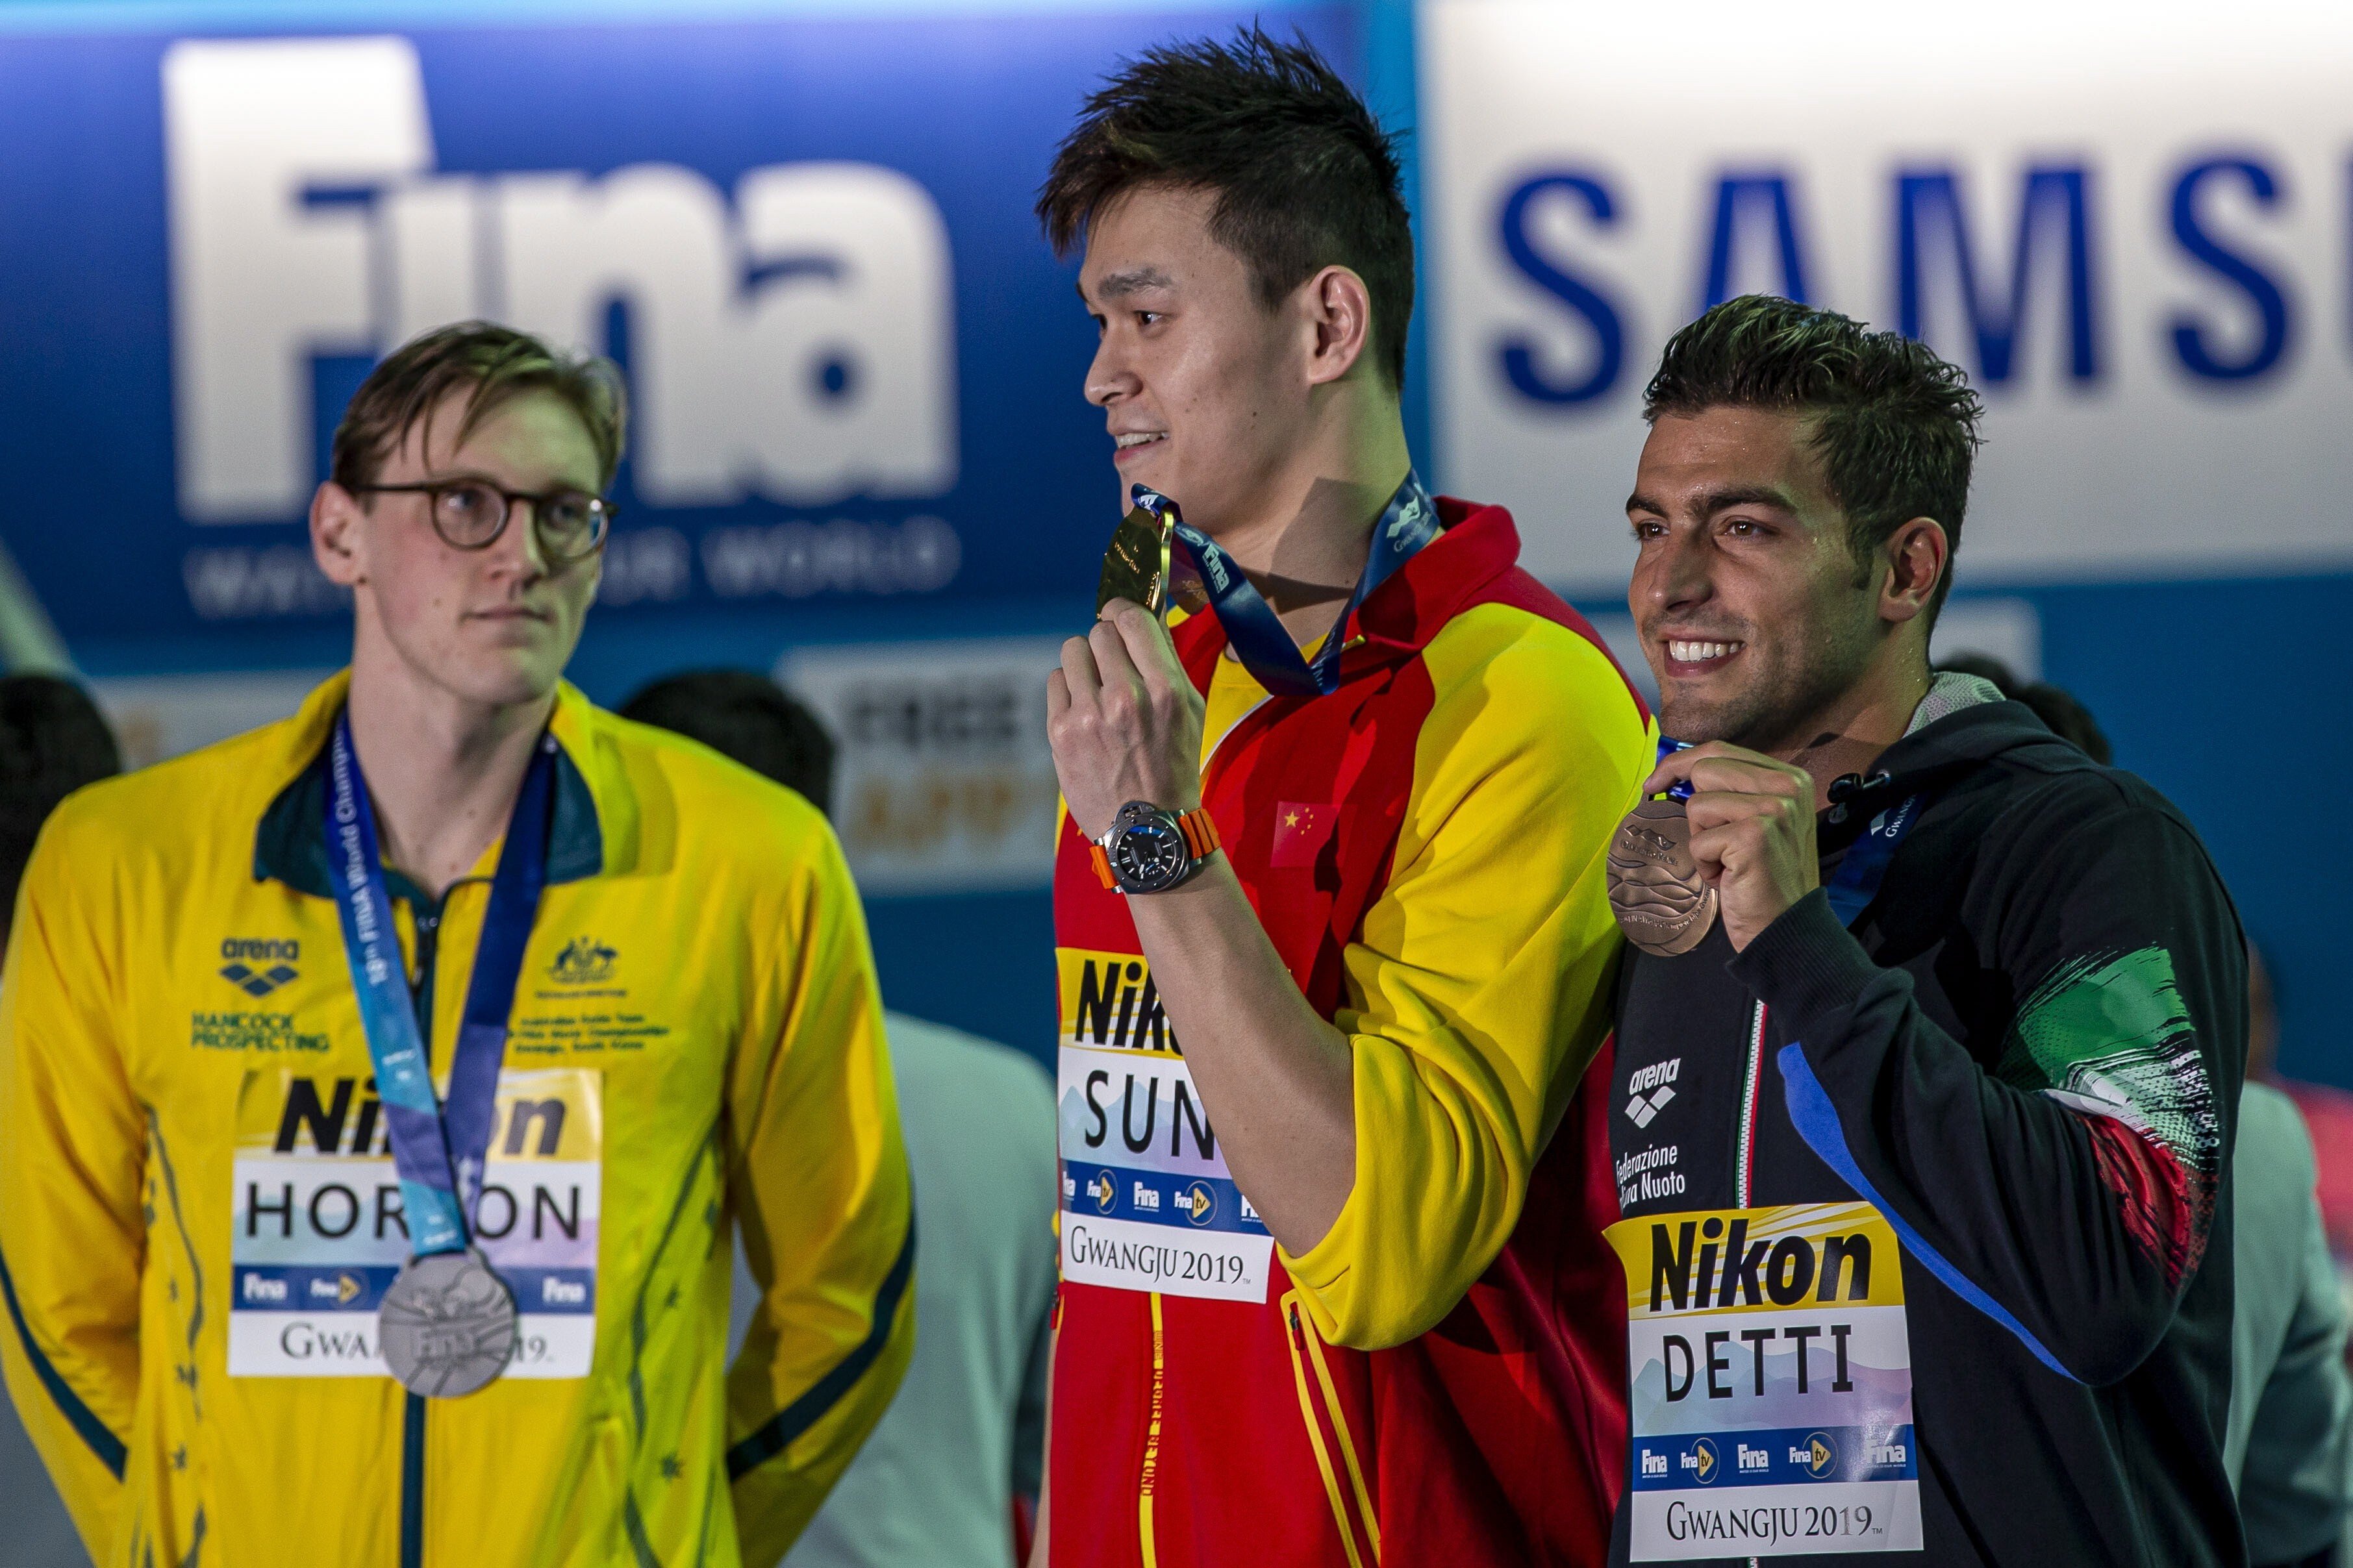 Mack Horton, of Australia, and winner Yang Sun, of China, at the podium medal awards after the men's 400m freestyle final at the Fina World Championships in Gwangju, South Korea in 2019. Photo: EPA